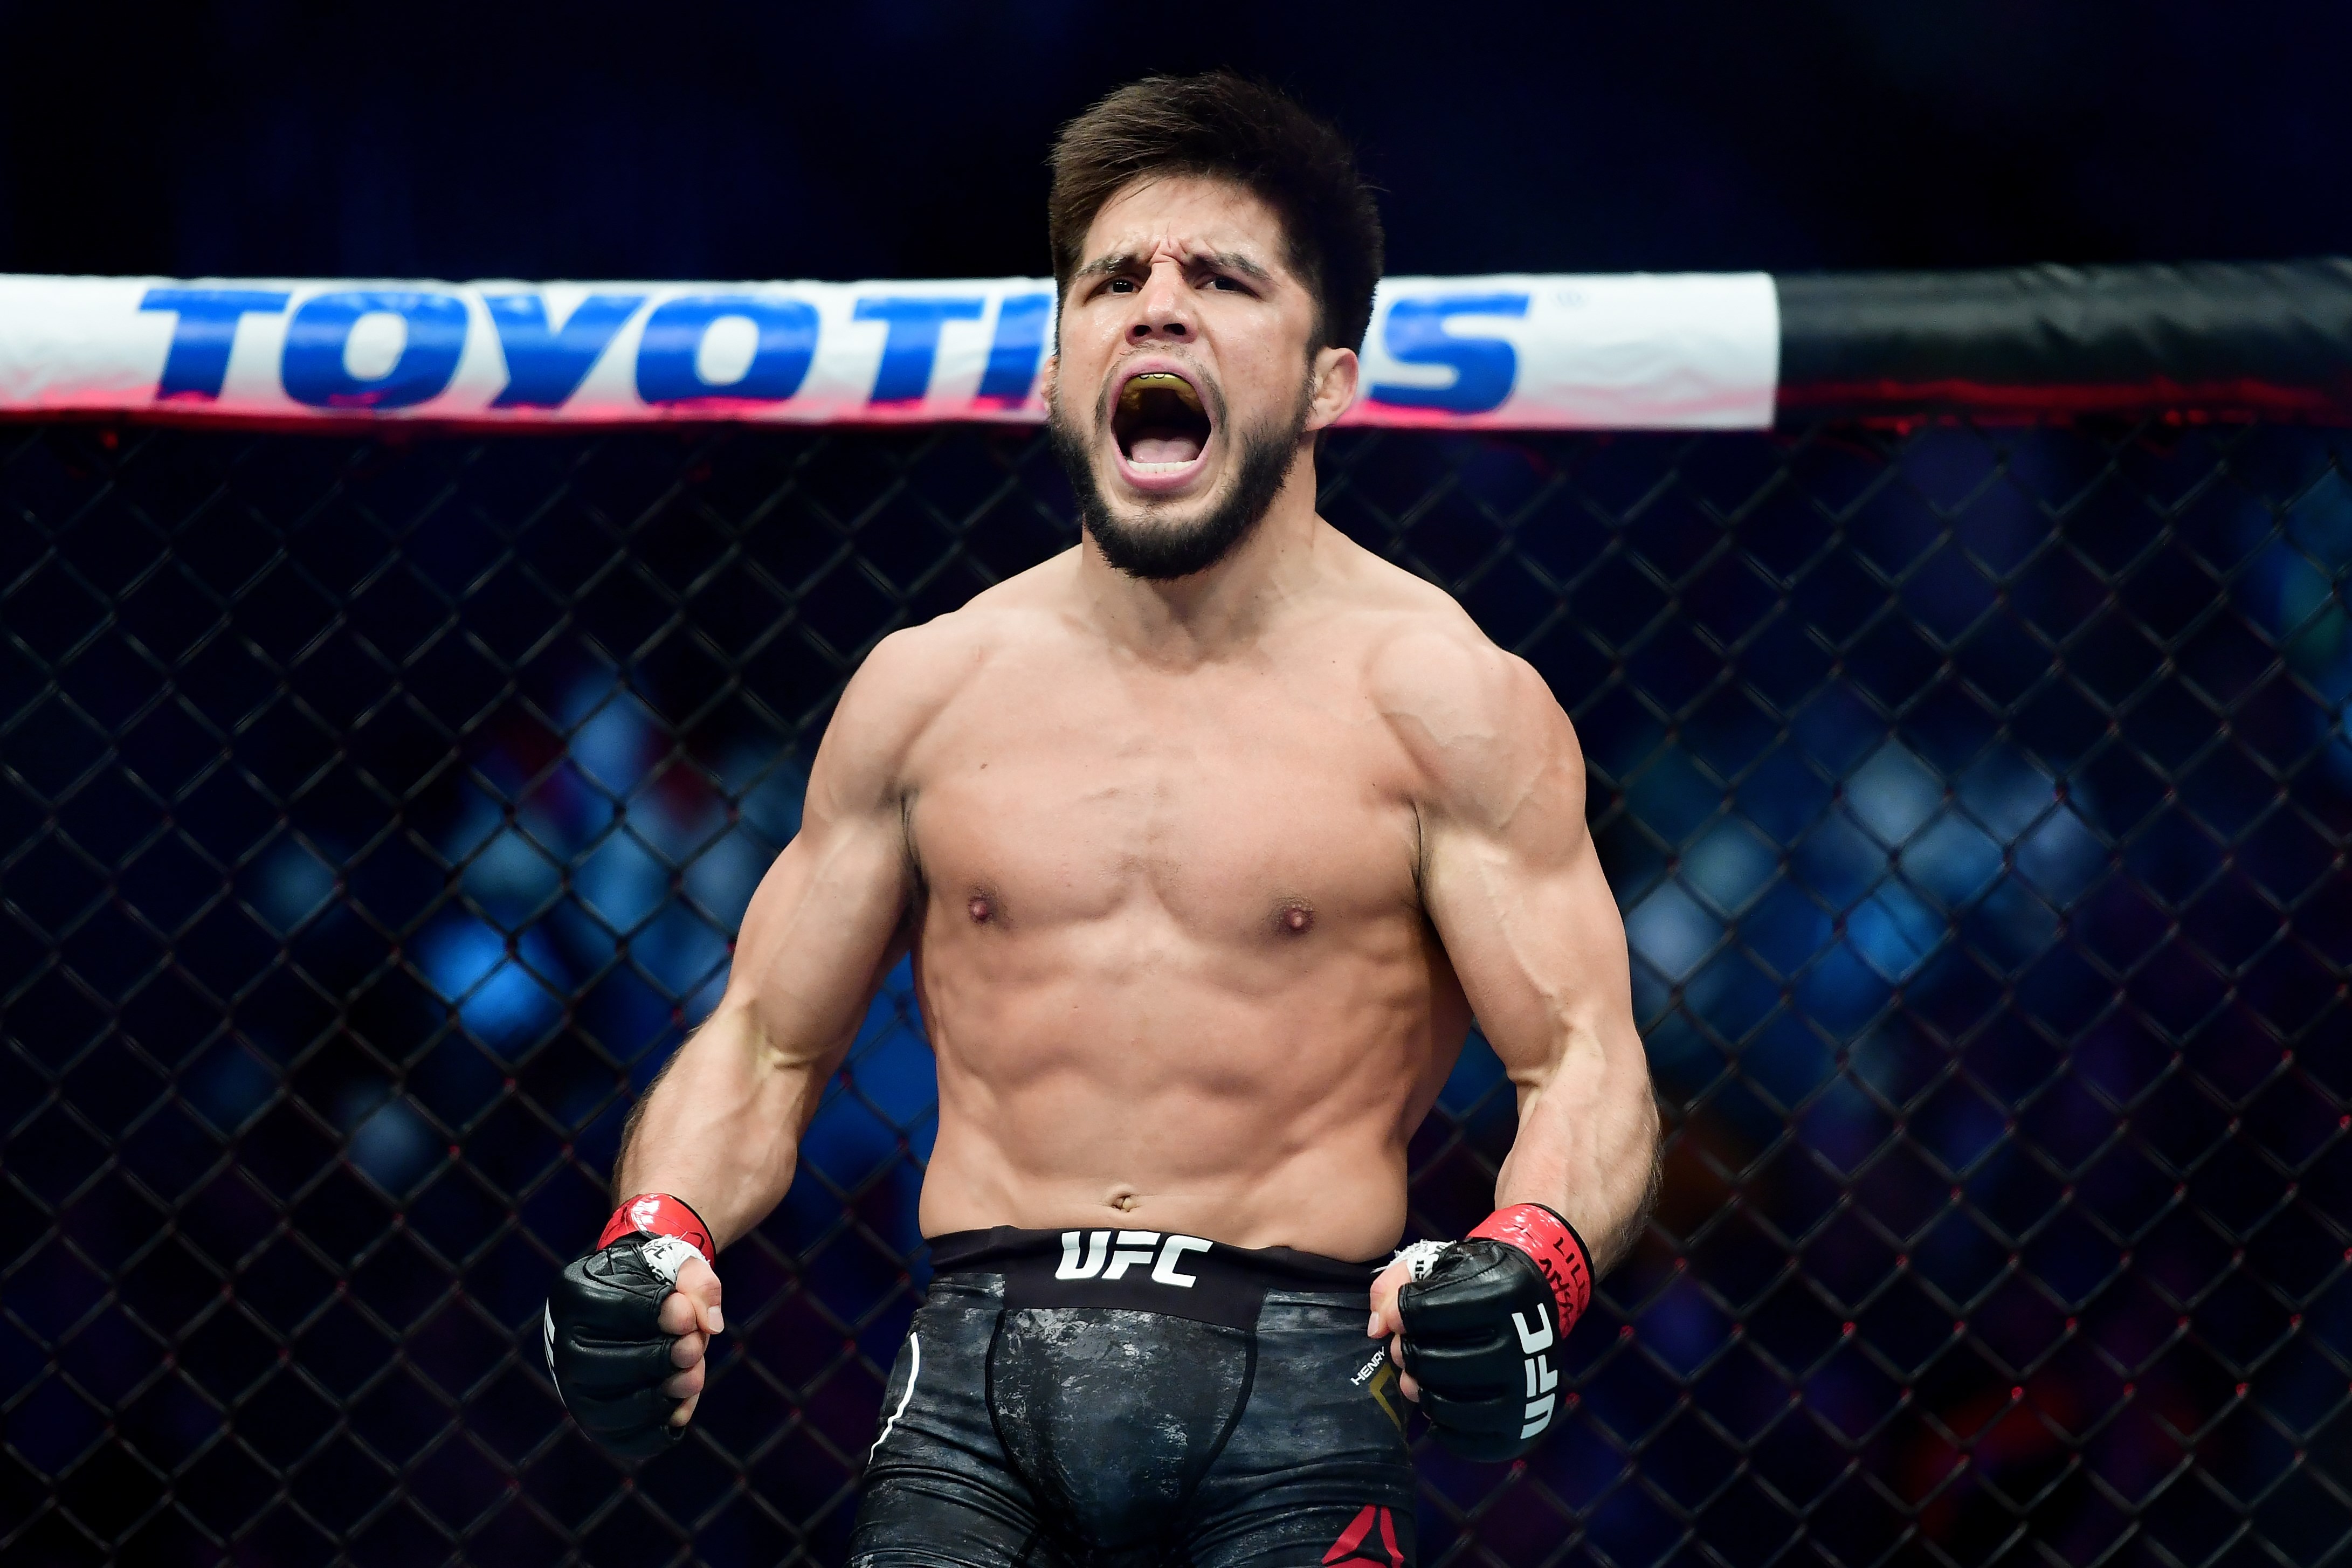 Henry Cejudo is set to face Jose Aldo in his first UFC bantamweight title defence. Photo: AFP